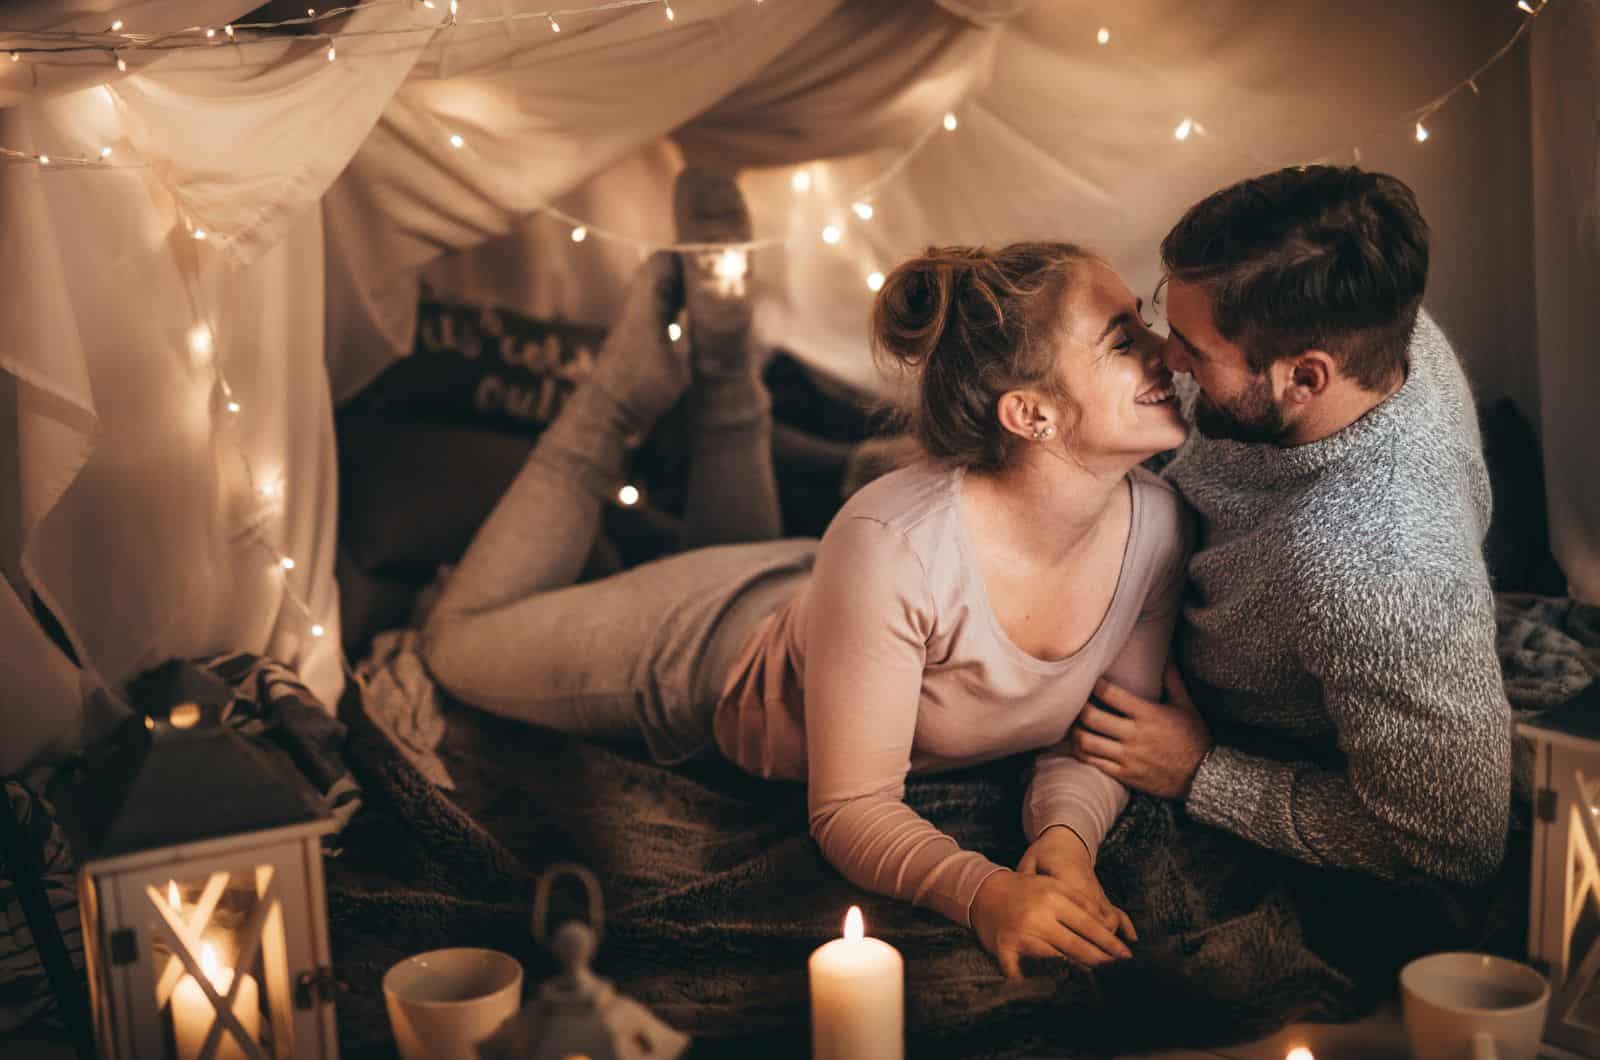 couple kissing in a romantic atmosphere with candles and lights